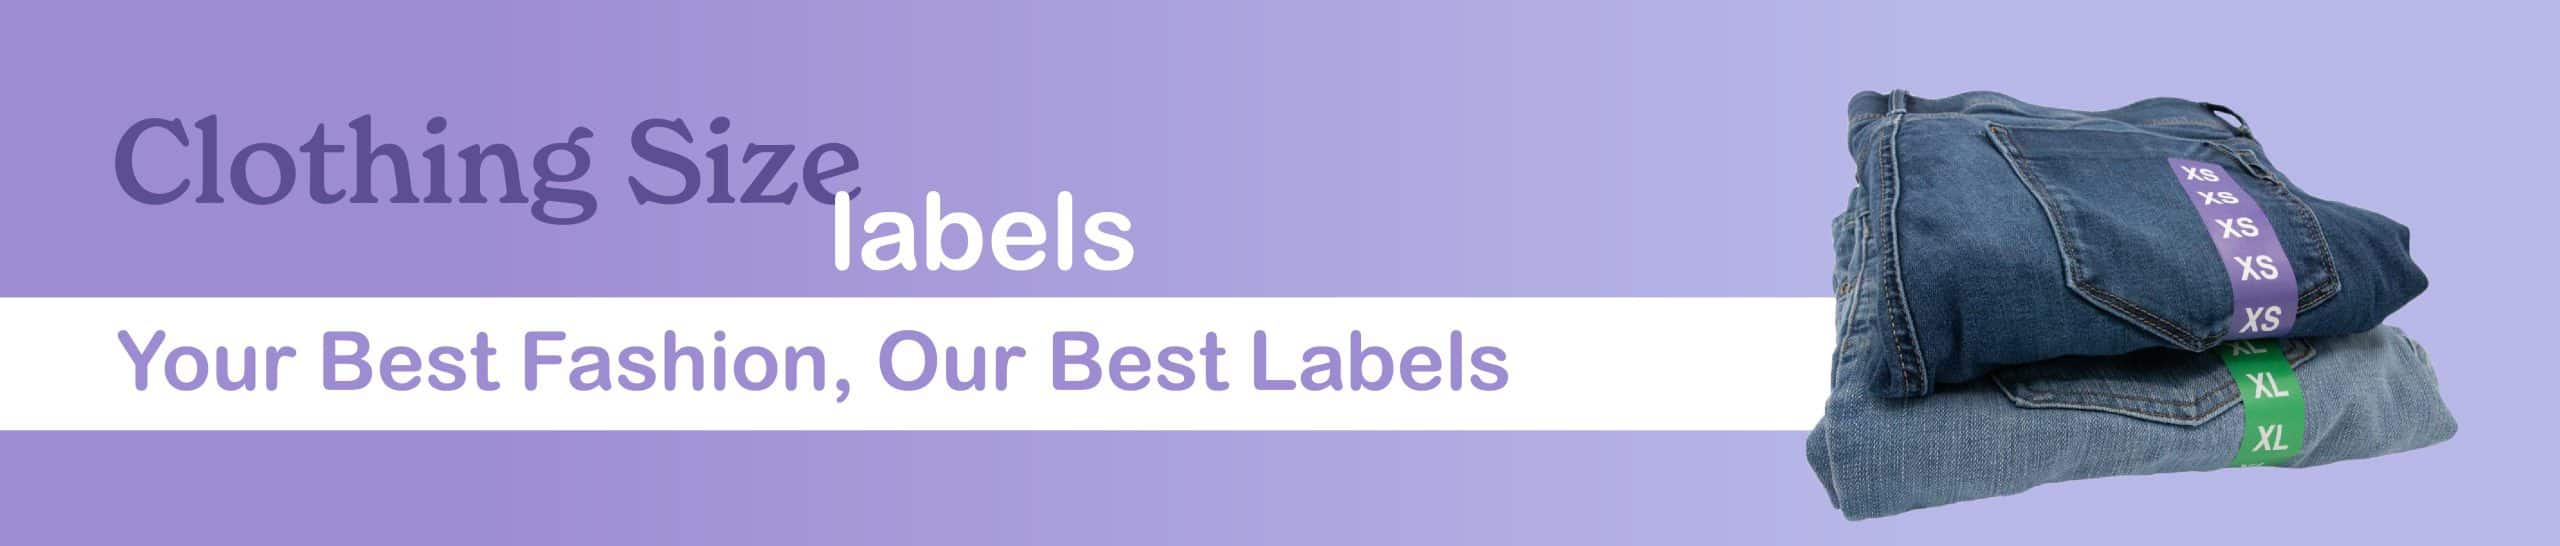 Clothing Size Labels: Your Best Fashion, Our Best Labels